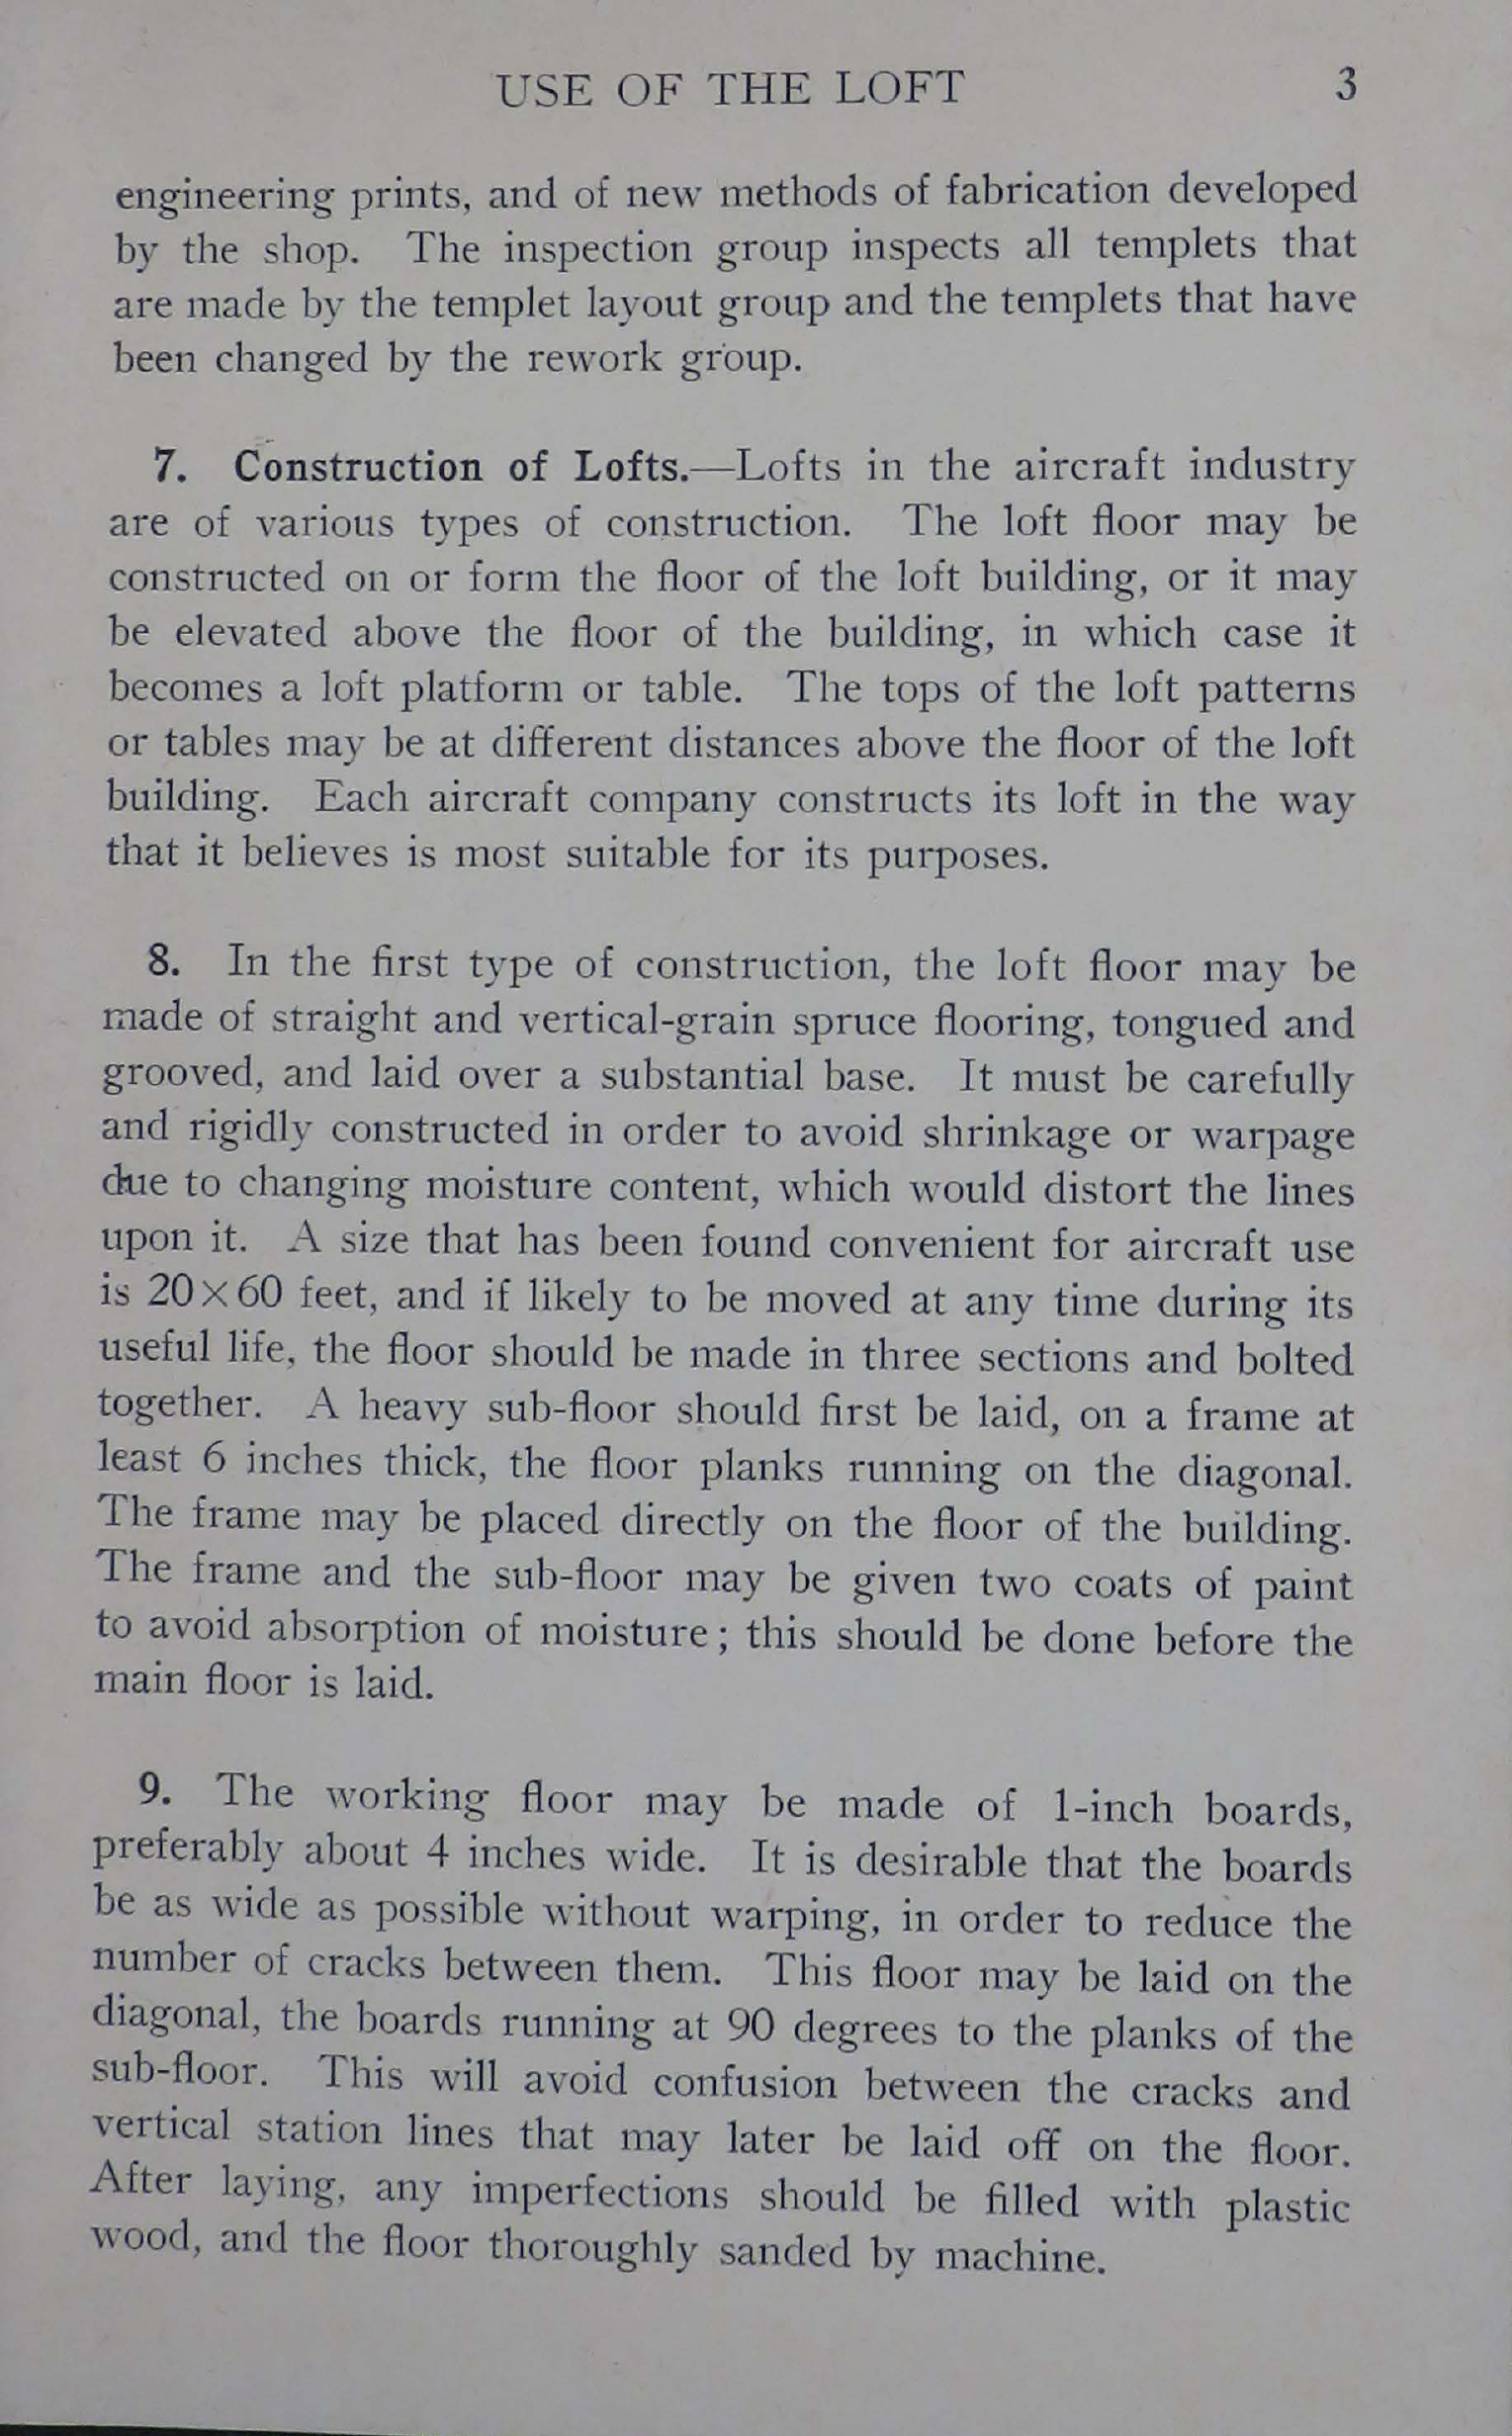 Sample page 5 from AirCorps Library document: Lofting and Layout - Use of the Loft - Bureau of Aeronautics